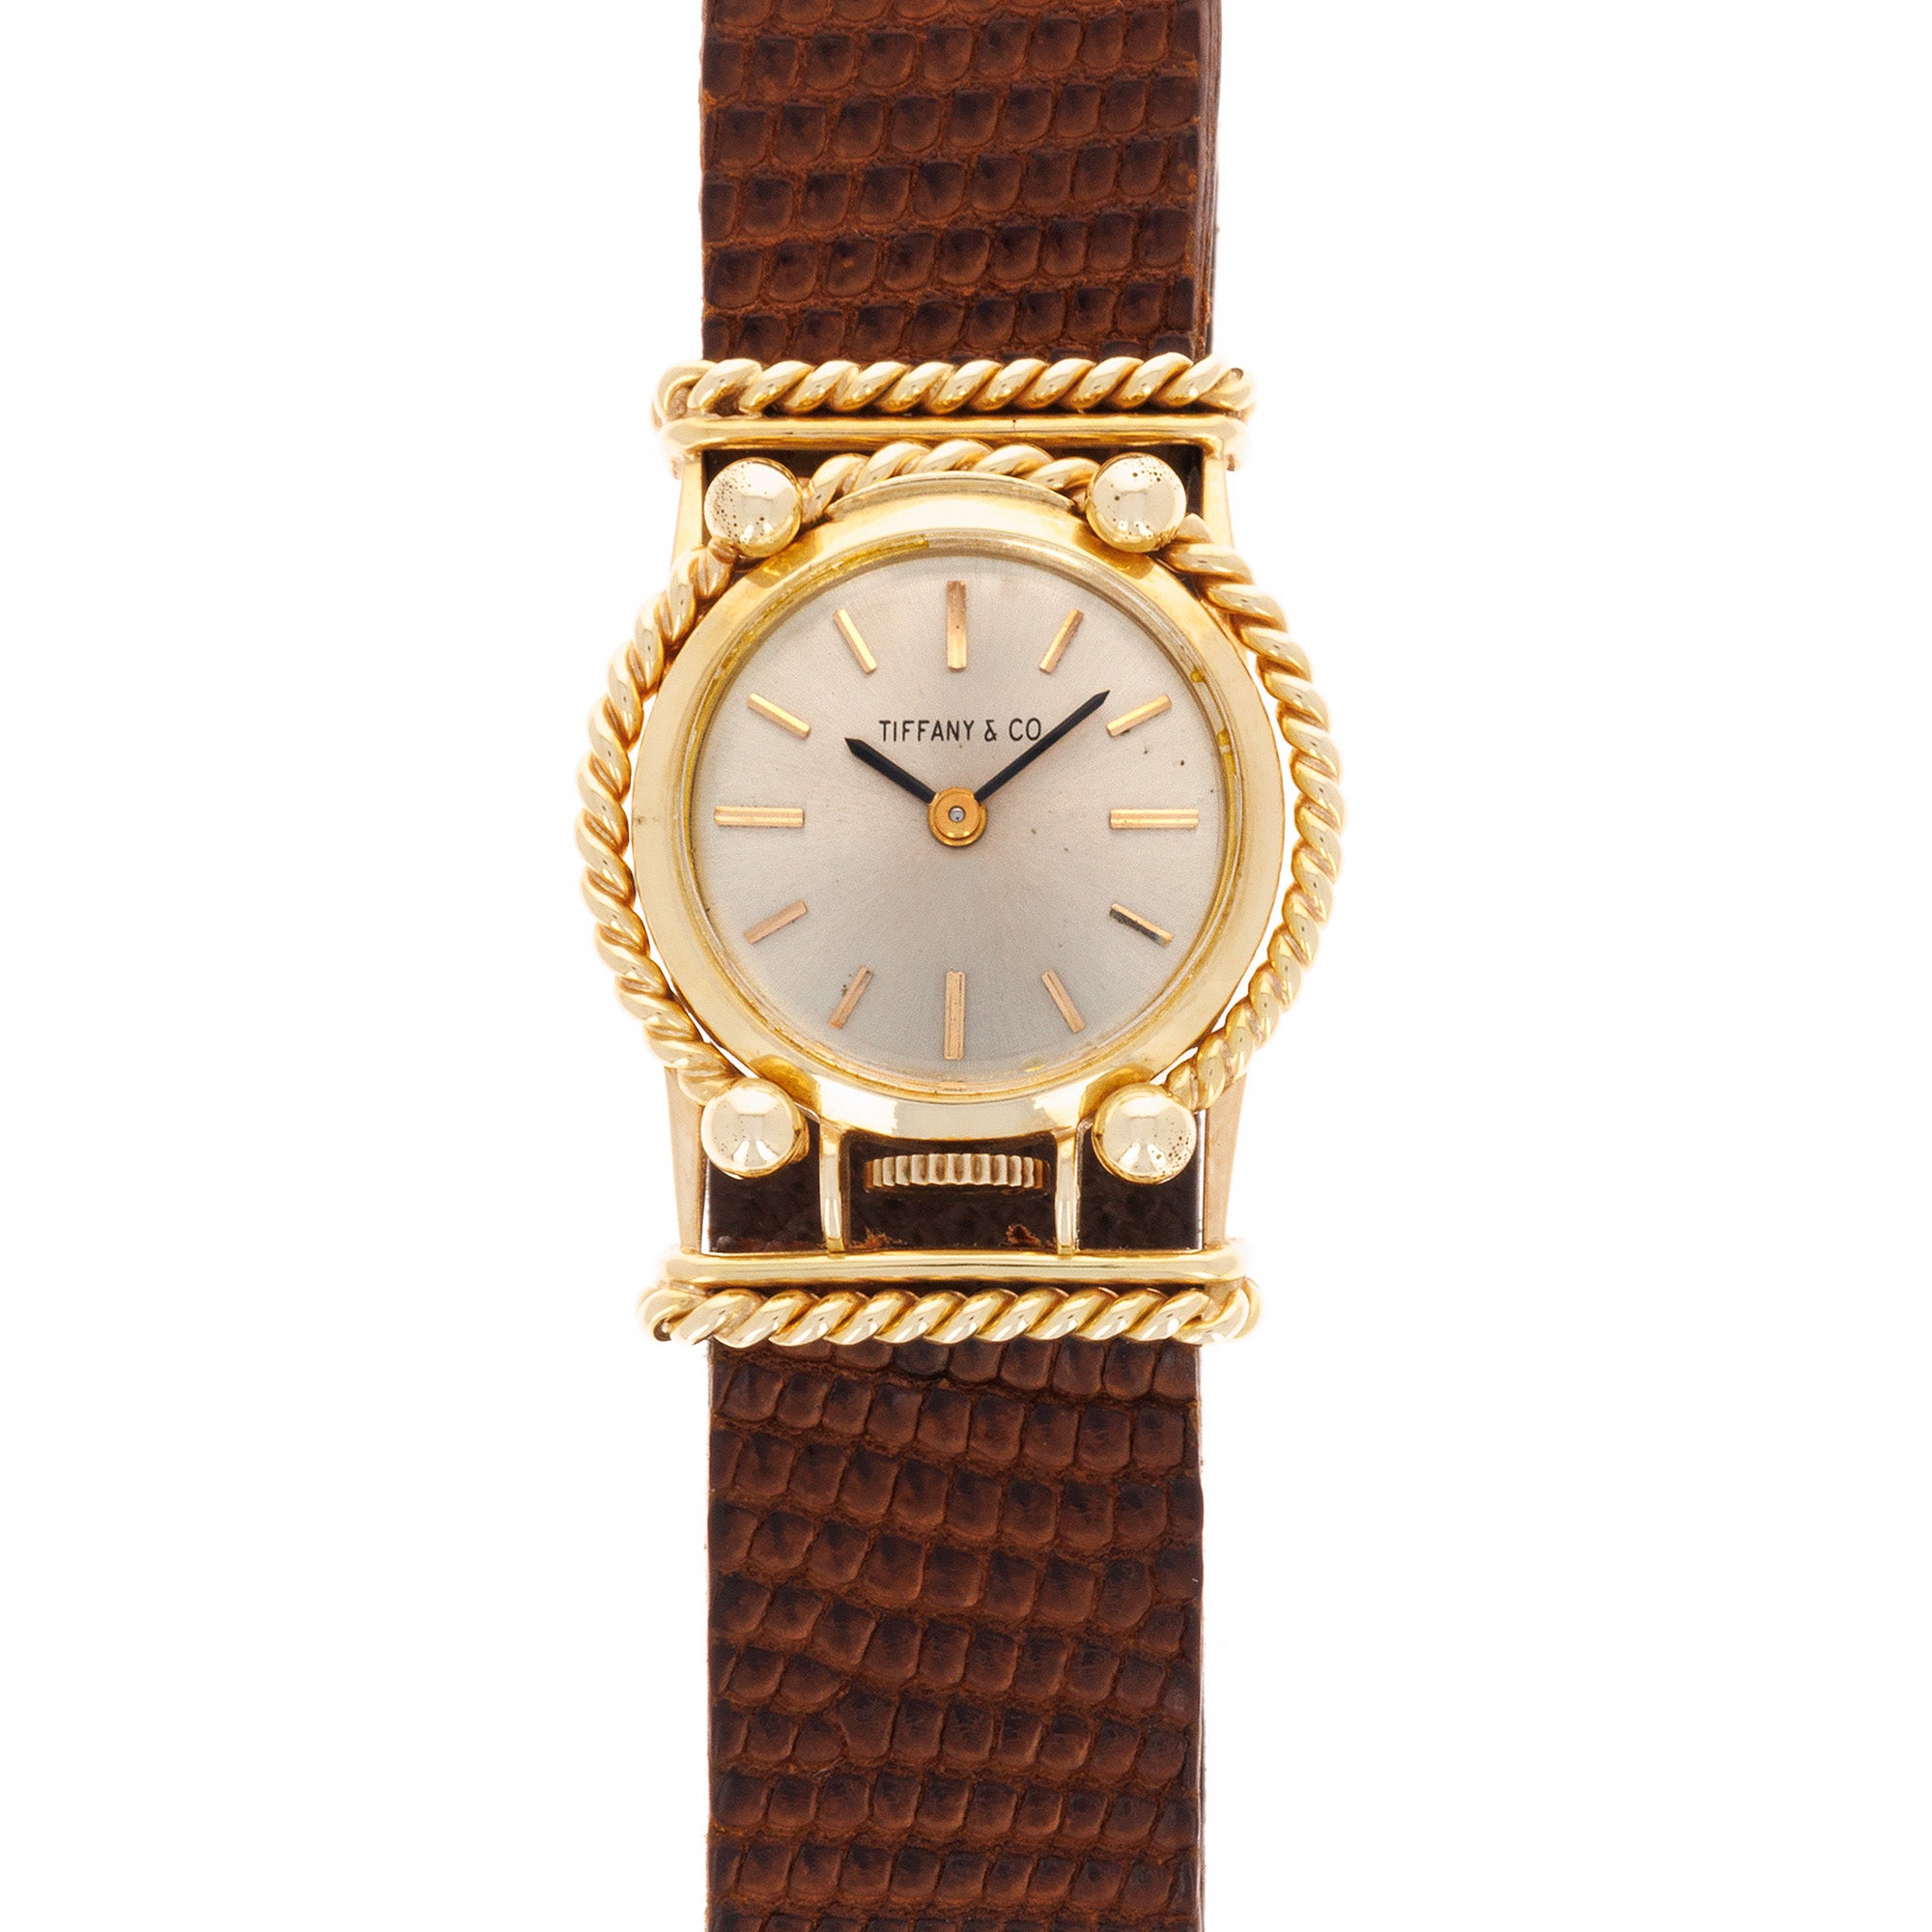 Tiffany & Co. - Tiffany & Co. Schlumberger Yellow Gold Watch with Engraving - The Keystone Watches